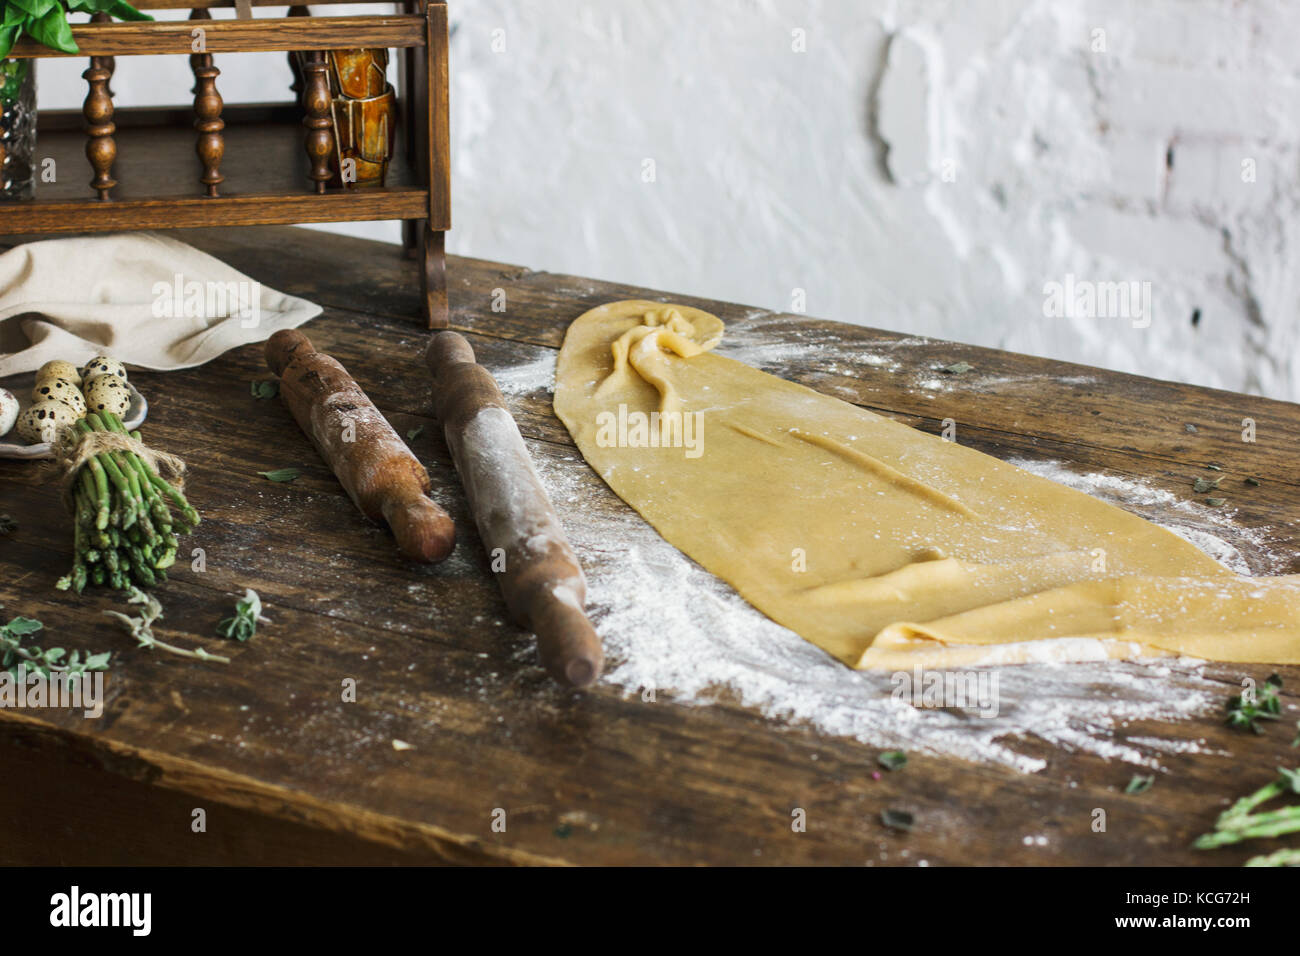 Ingredients for making homemade pasta, rolling pin, quail eggs, asparagus on wooden table Stock Photo